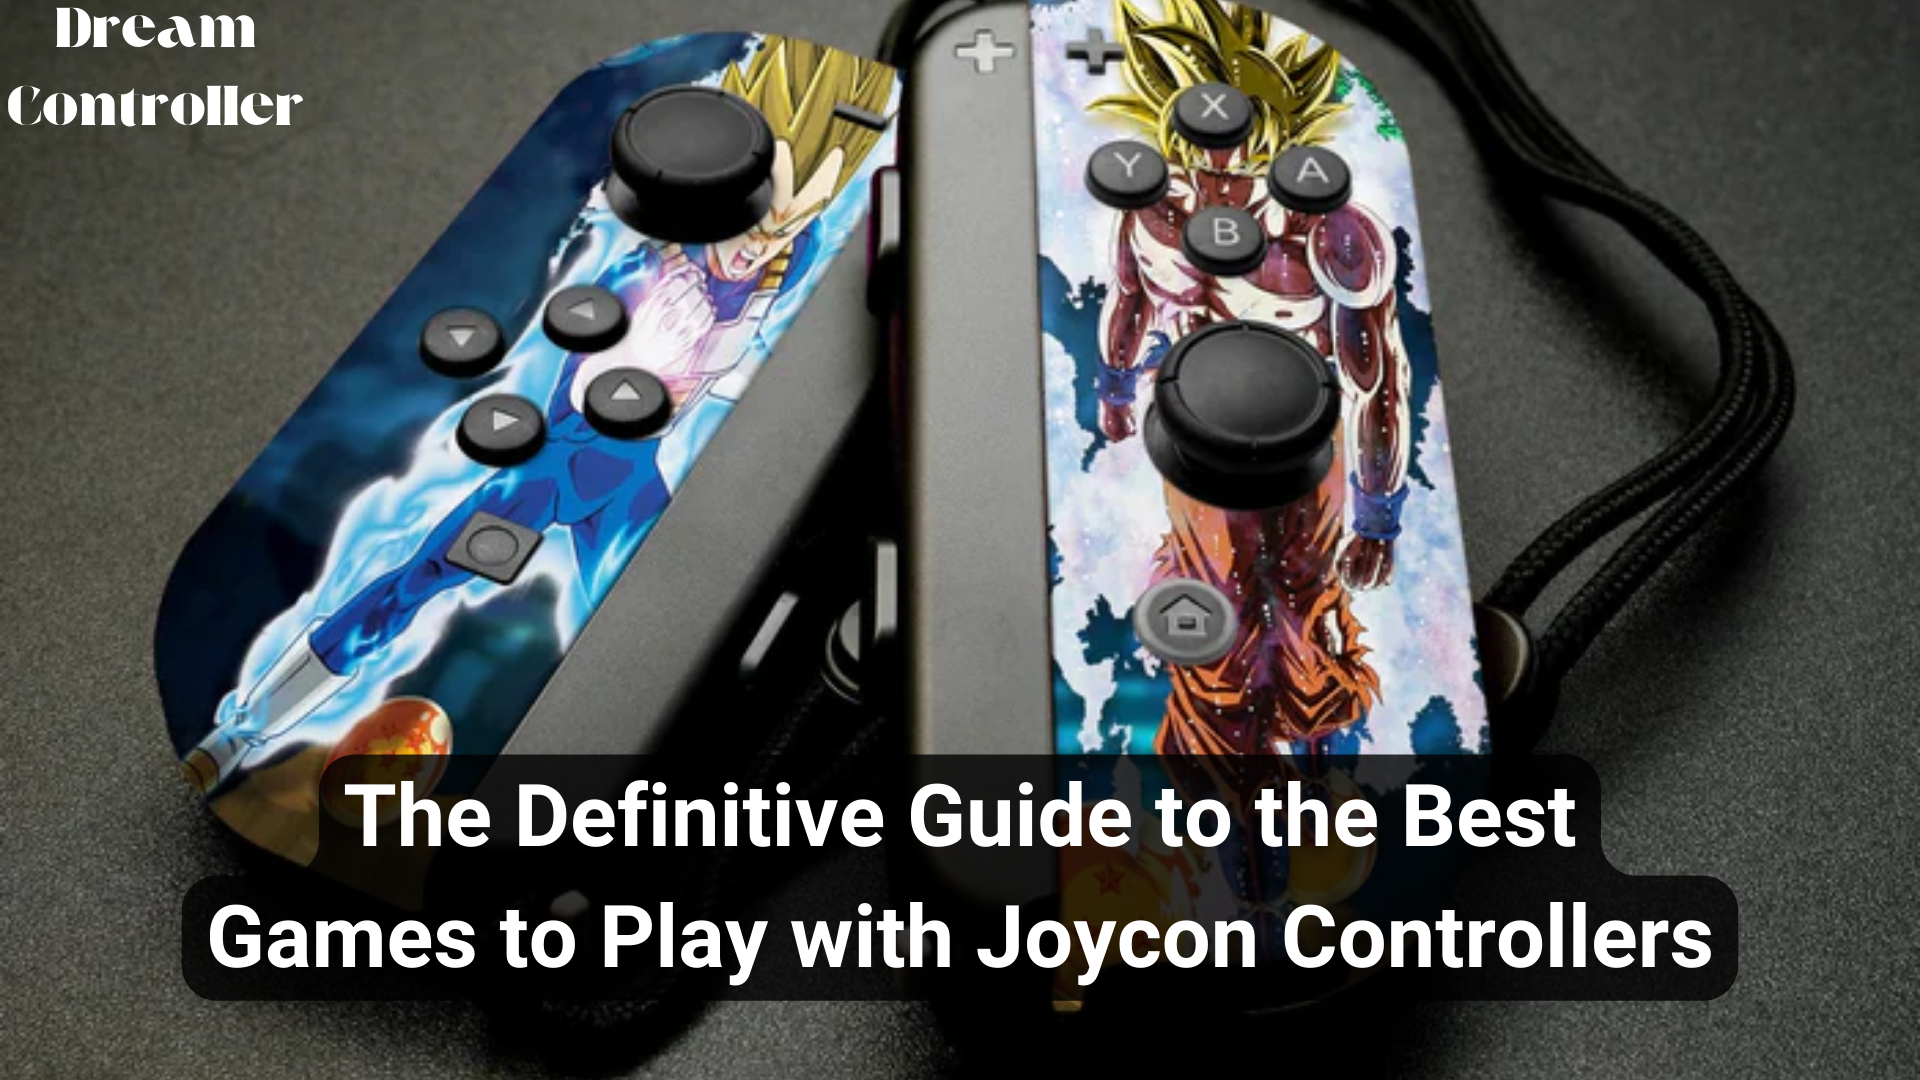 The Definitive Guide to the Best Games to Play with Joycon Controllers